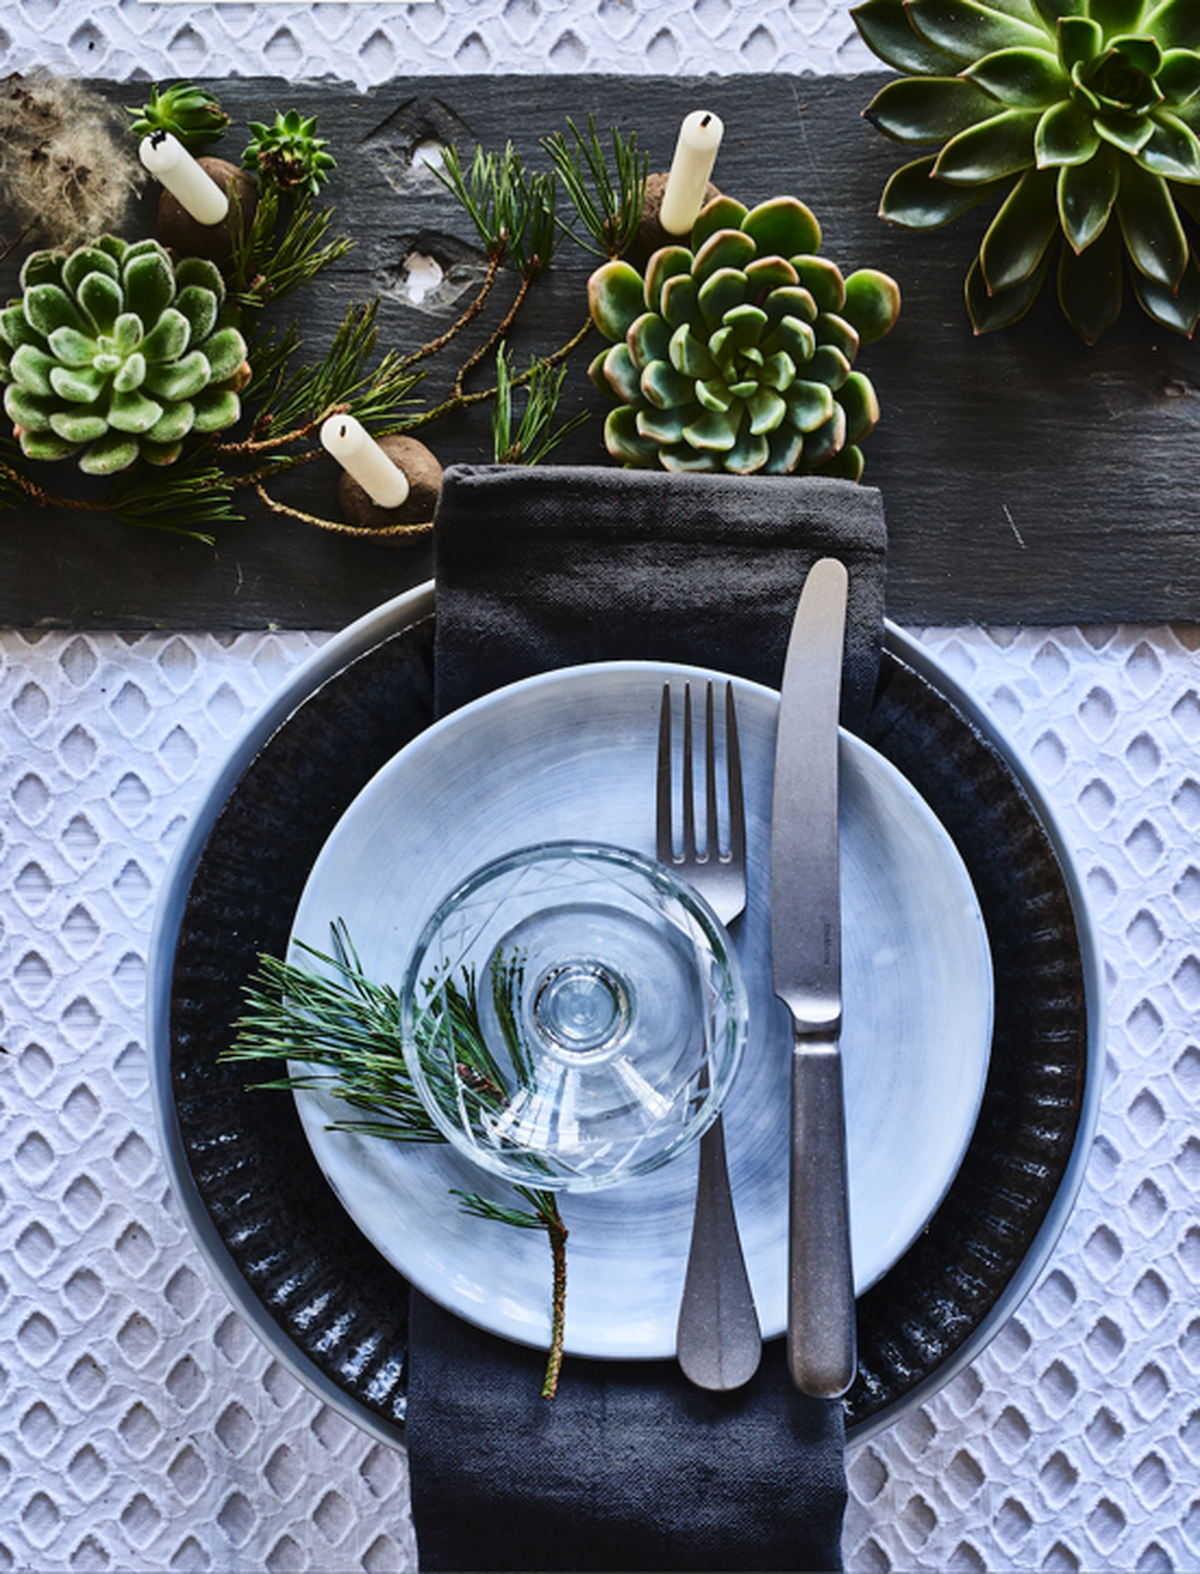 Table setting in warm Nordic style created by Pernille Albers and Nick Degn Fotografi for Mad&Bolig